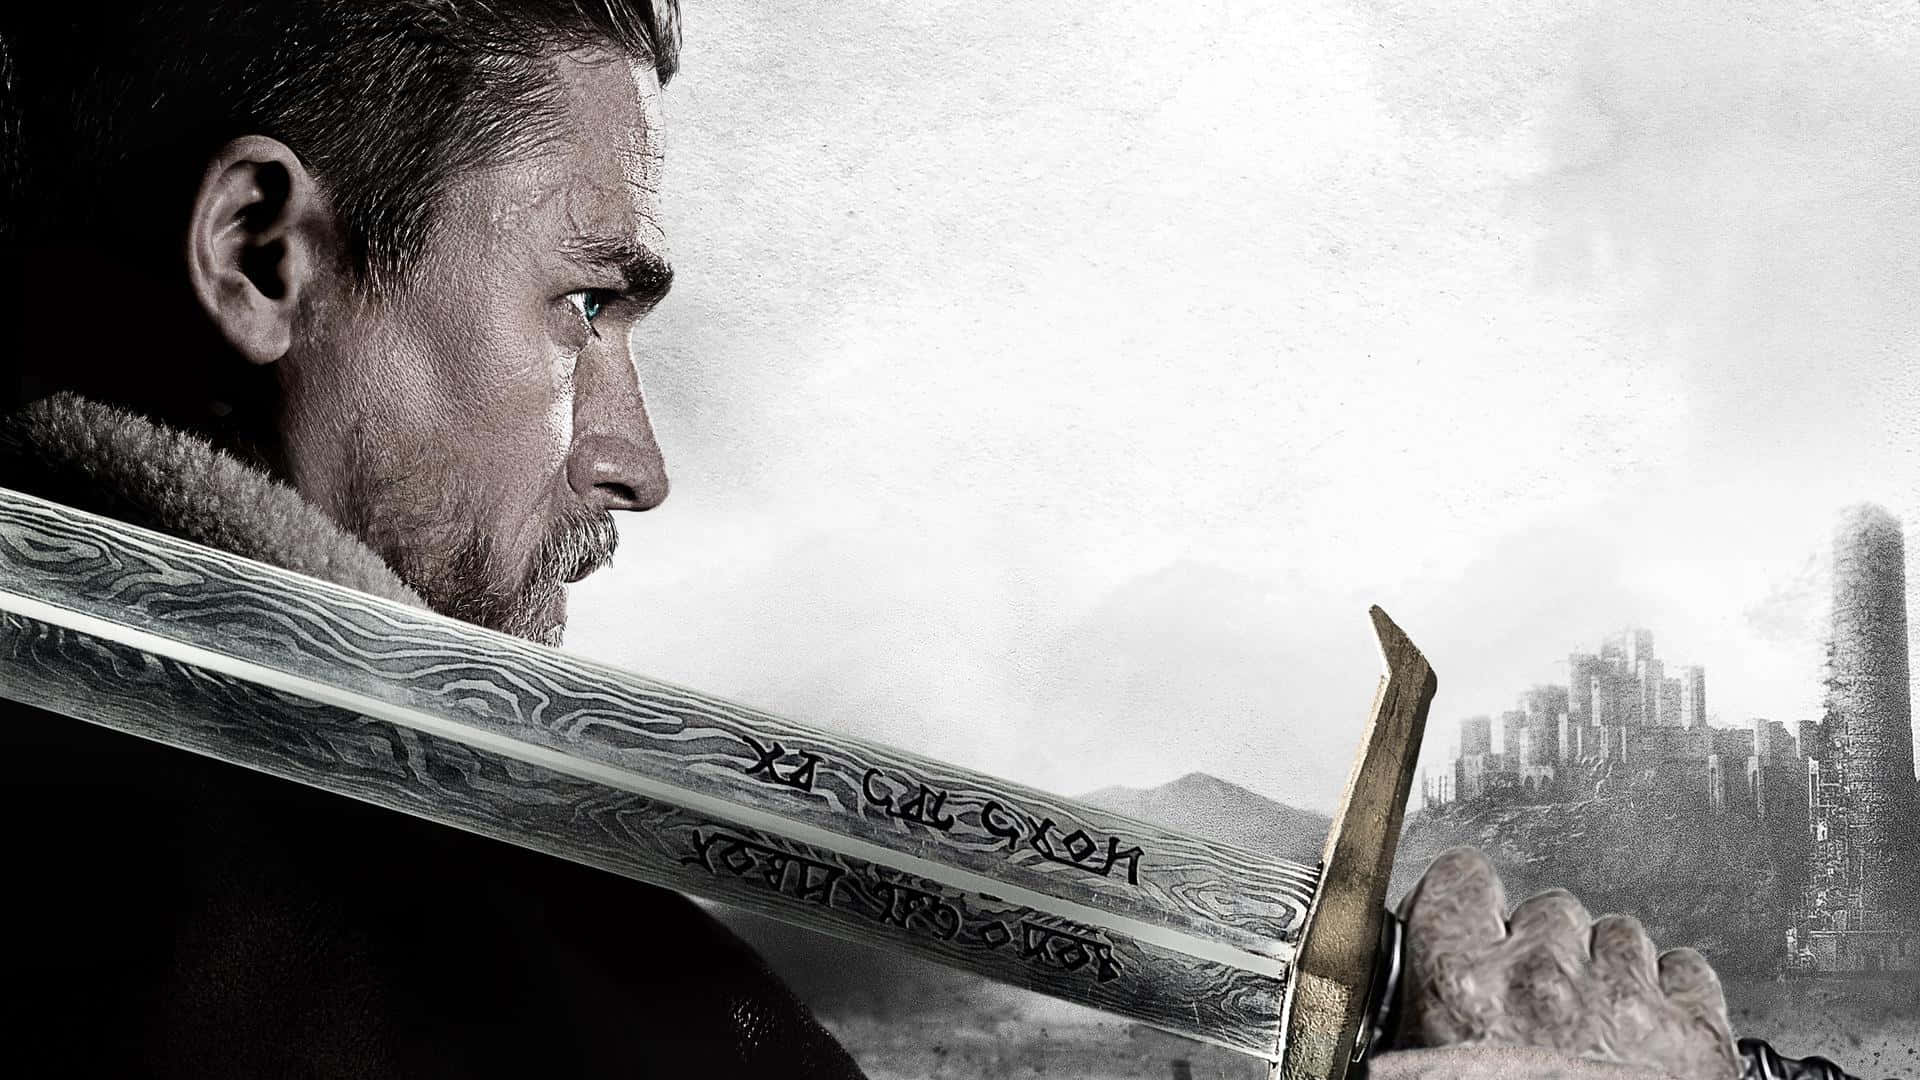 The Hobbit Movie Poster With A Man Holding A Sword